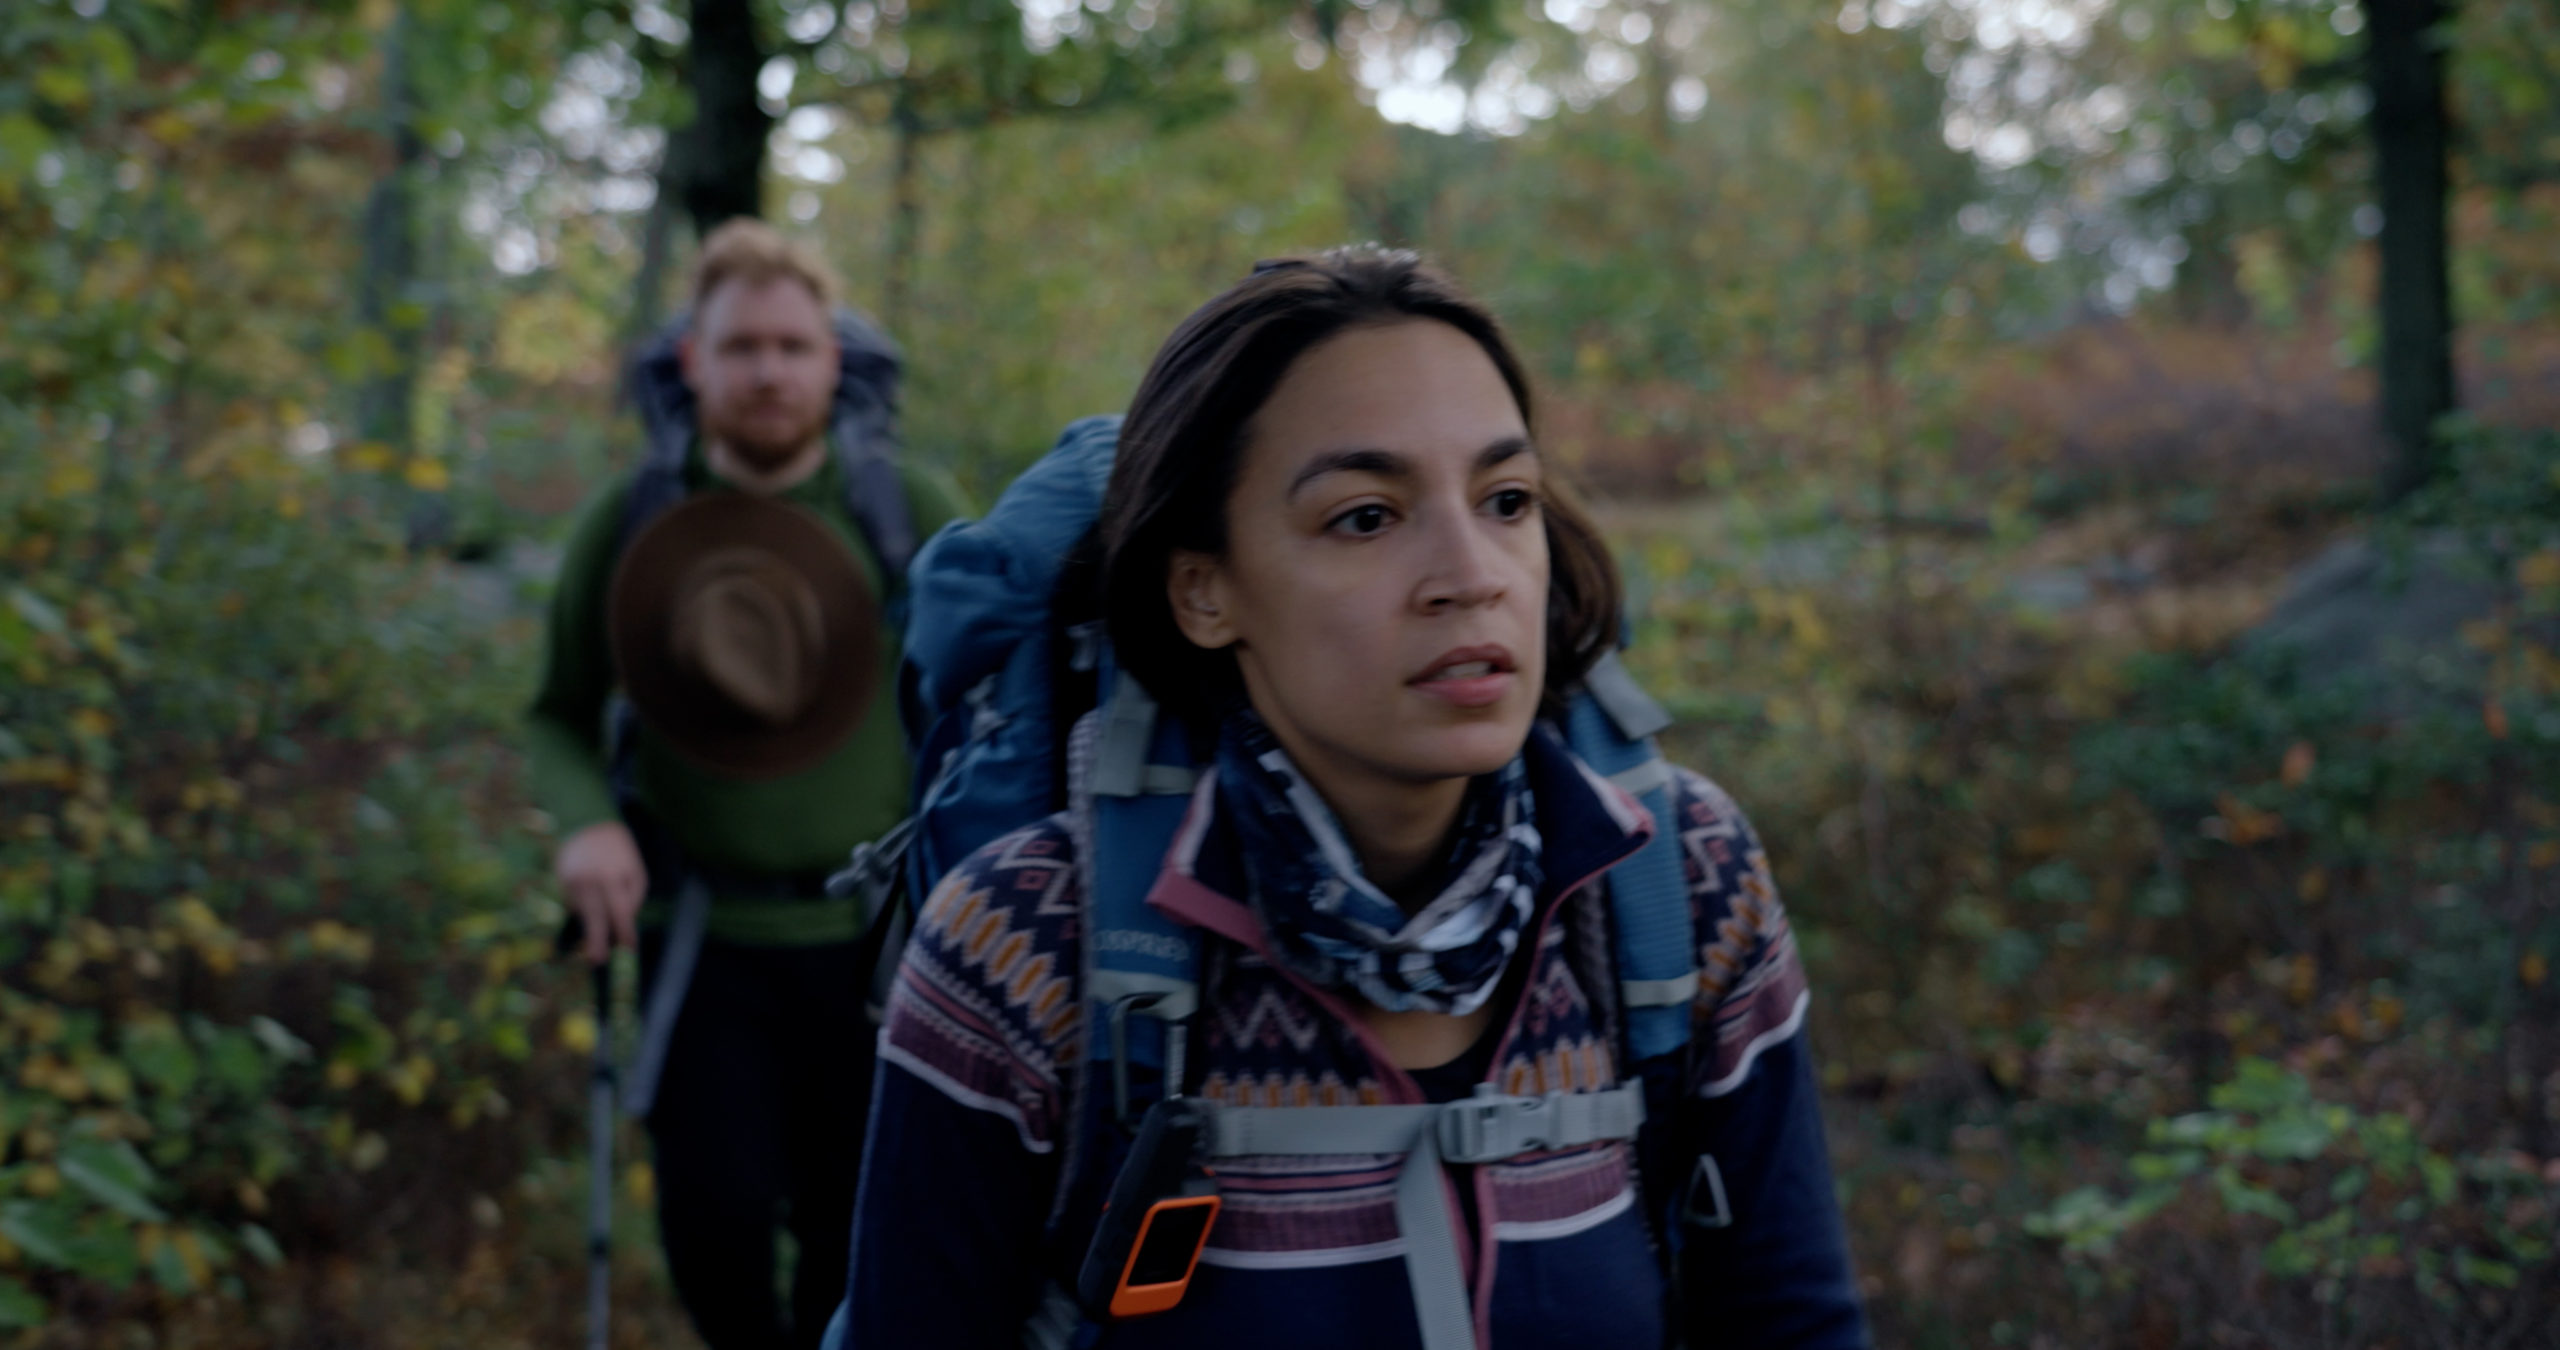 Trailer Watch: Rachel Lears Reunites with Alexandria Ocasio-Cortez for “To the End”